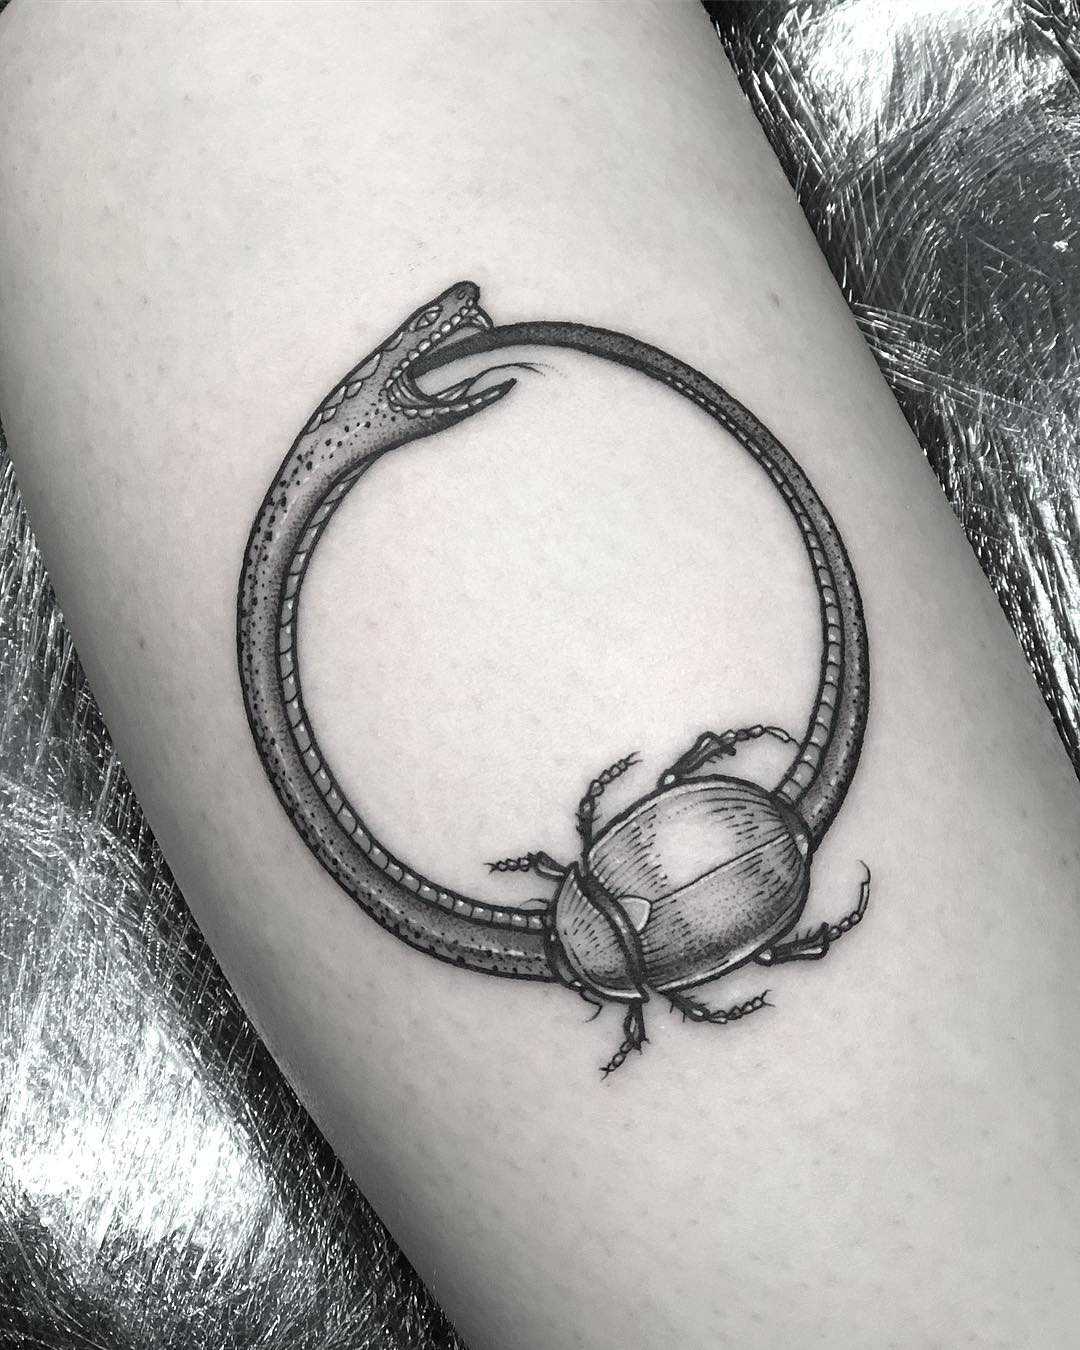 Ouroboros and scarab tattoo by Lozzy Bones